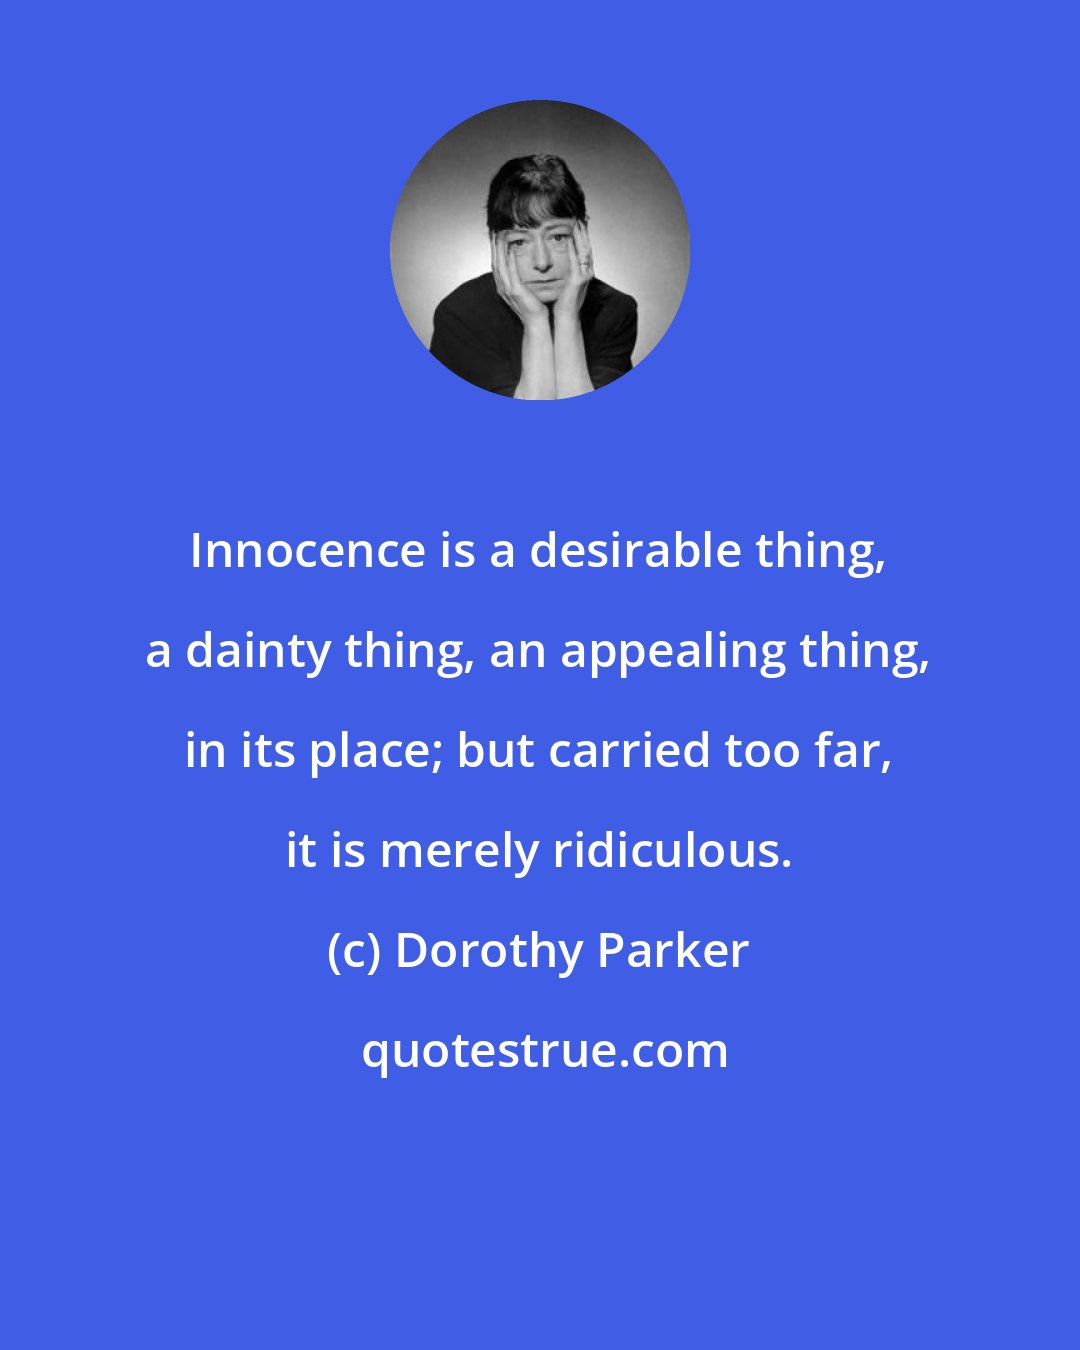 Dorothy Parker: Innocence is a desirable thing, a dainty thing, an appealing thing, in its place; but carried too far, it is merely ridiculous.